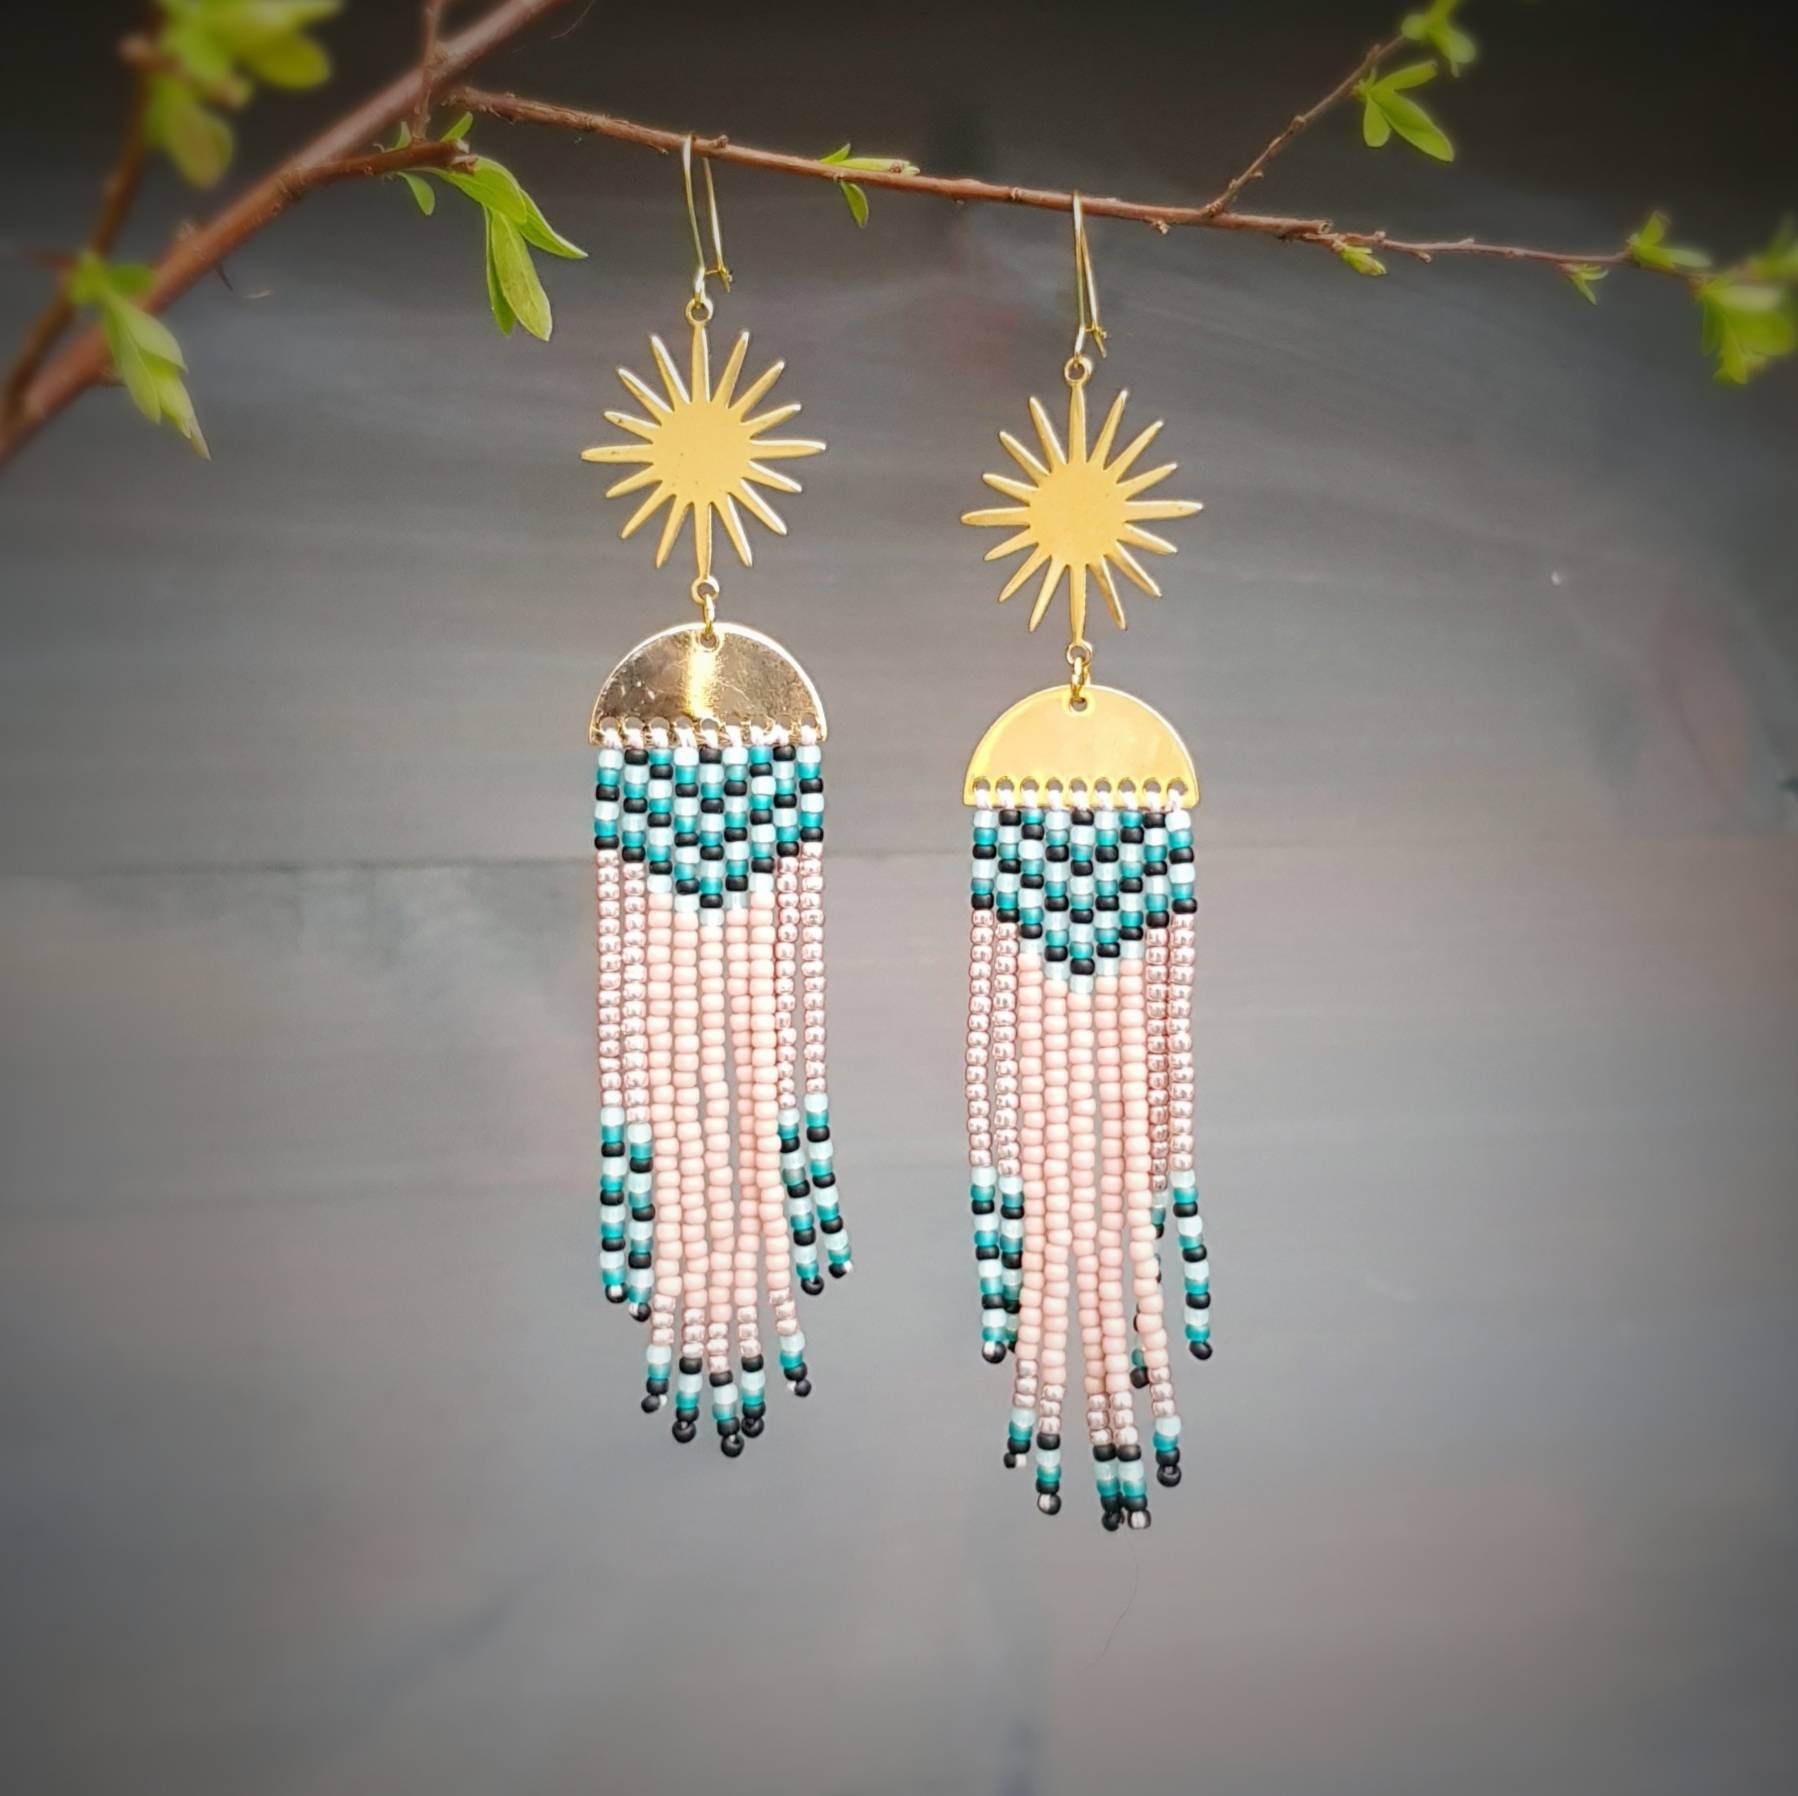 Jay Sunrise Beaded Fringe Earrings, Gold Plated. Made in Cornwall. Free Polishing Cloth Included. Plastic Shop